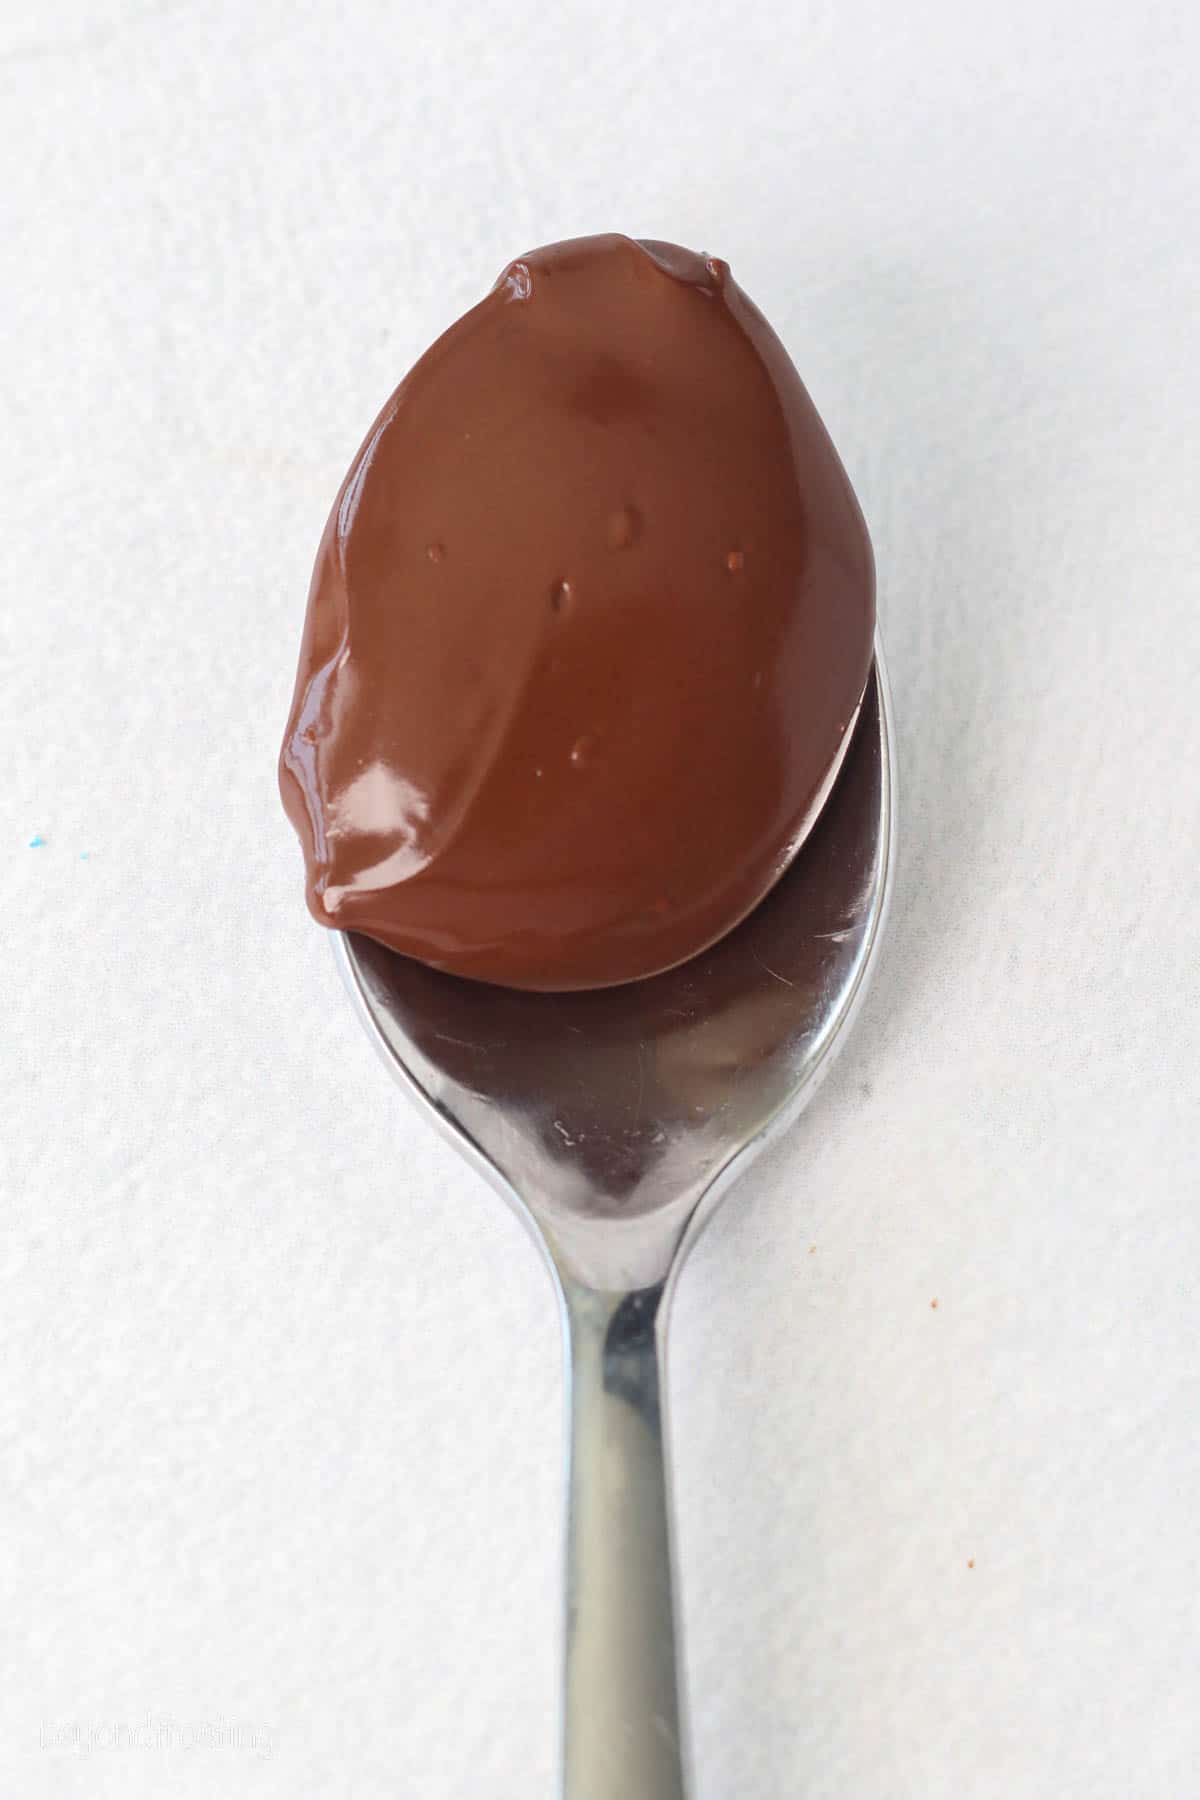 A spoonful of melted chocolate.